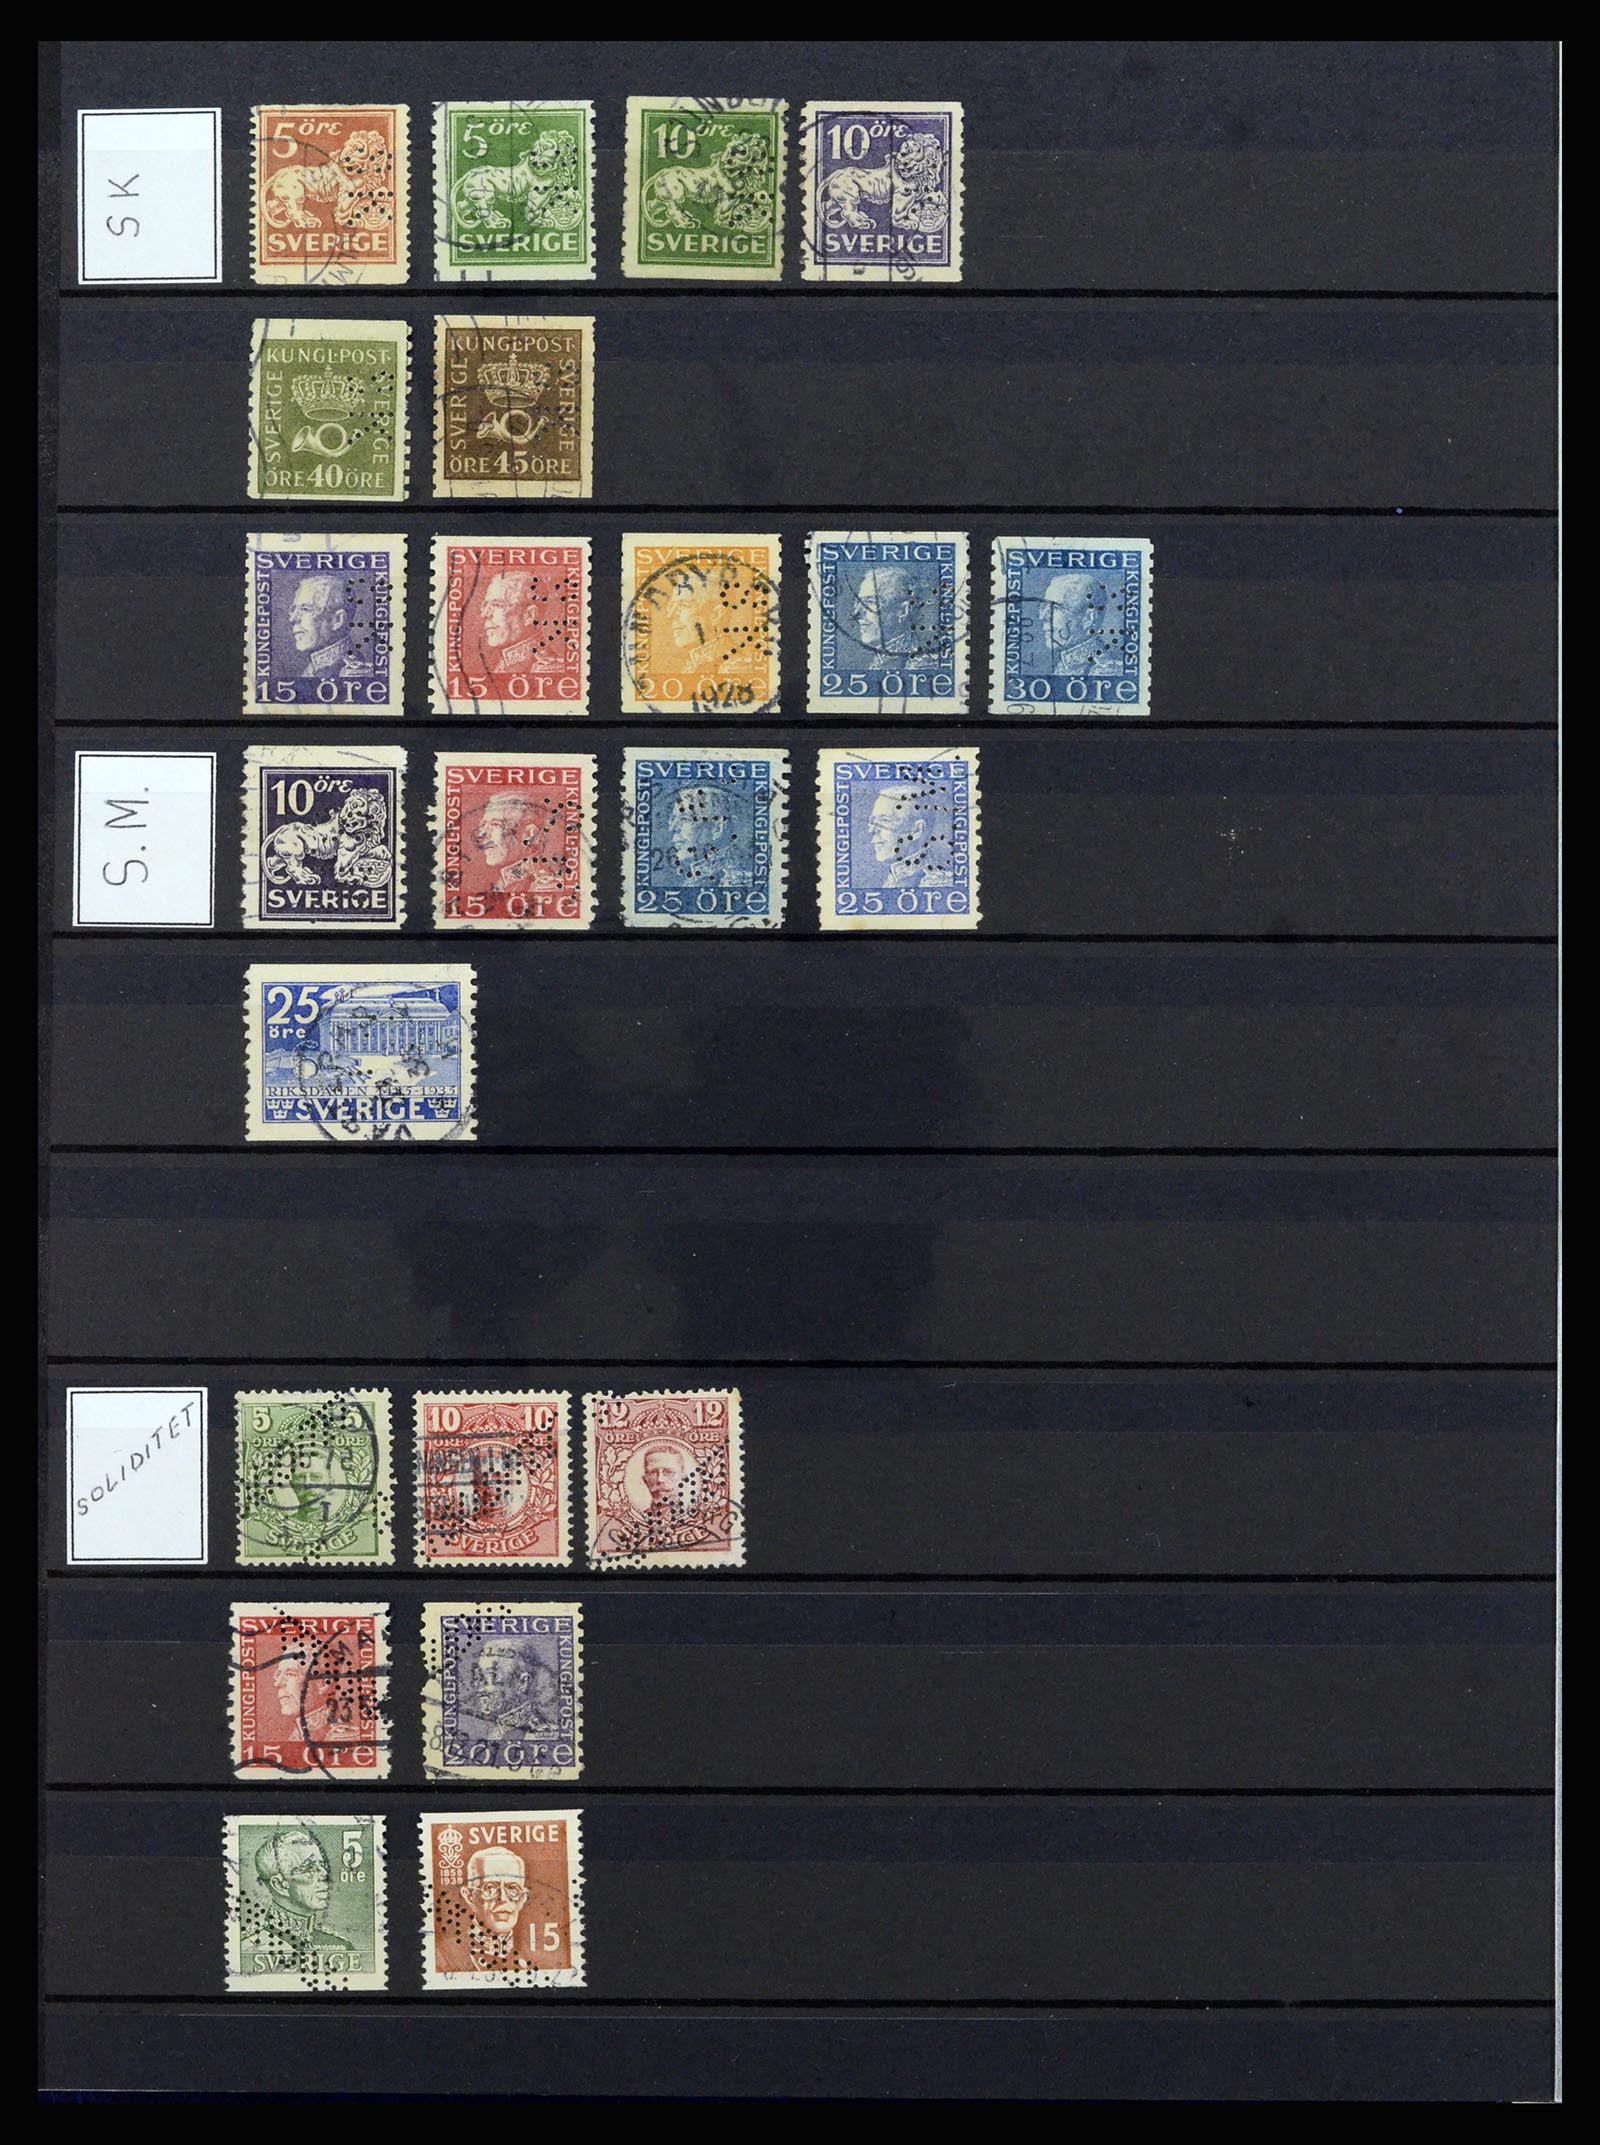 37057 071 - Stamp collection 37057 World perfins 1880-1950.